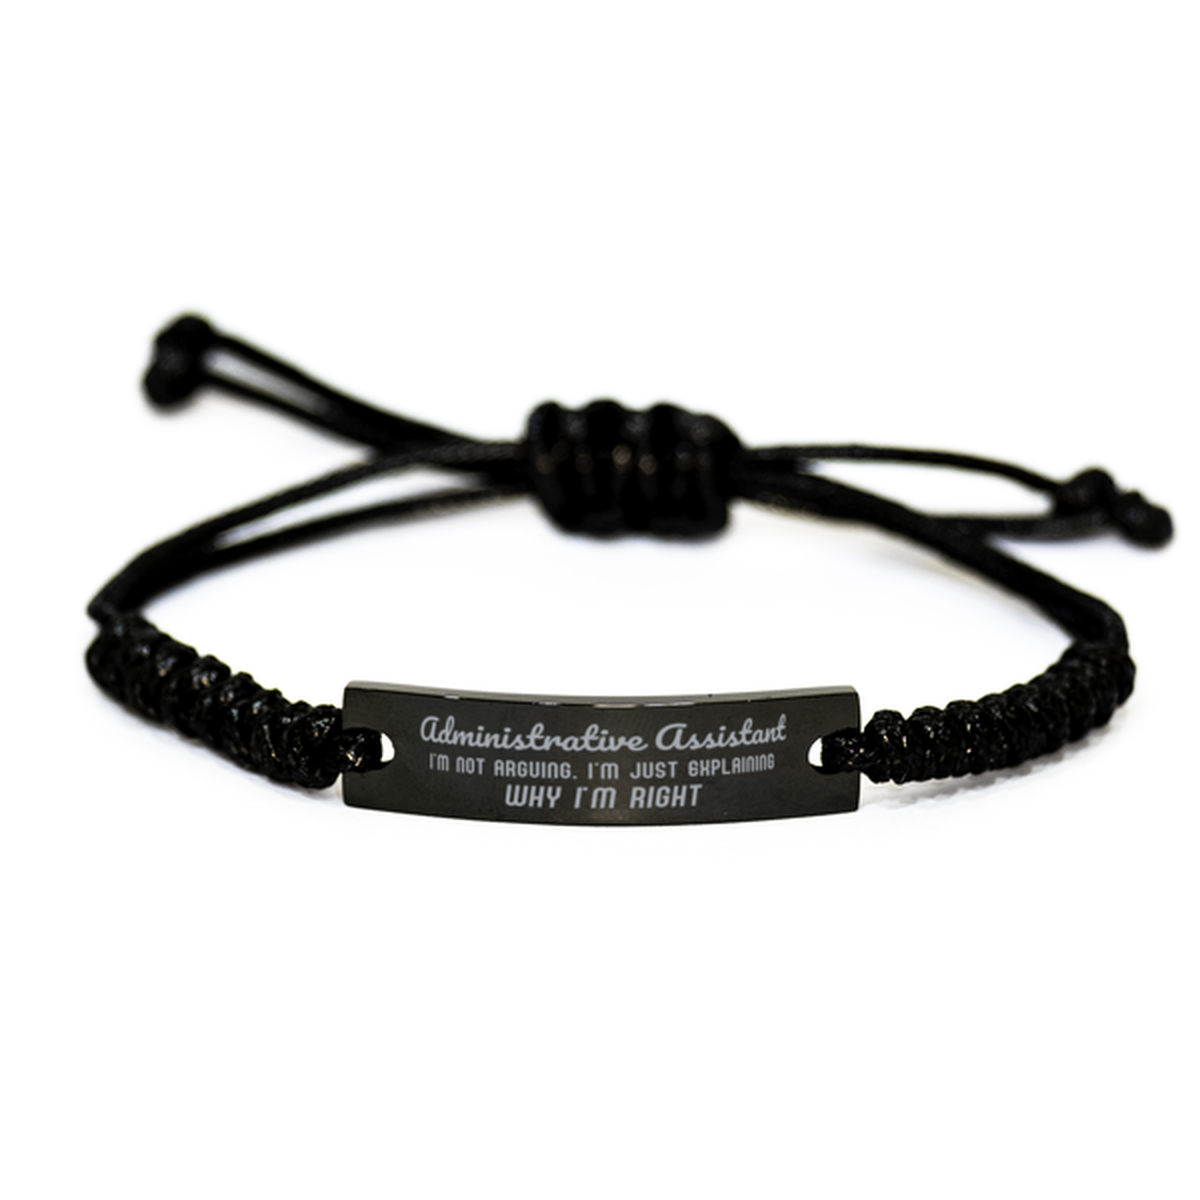 Administrative Assistant I'm not Arguing. I'm Just Explaining Why I'm RIGHT Black Rope Bracelet, Funny Saying Quote Administrative Assistant Gifts For Administrative Assistant Graduation Birthday Christmas Gifts for Men Women Coworker